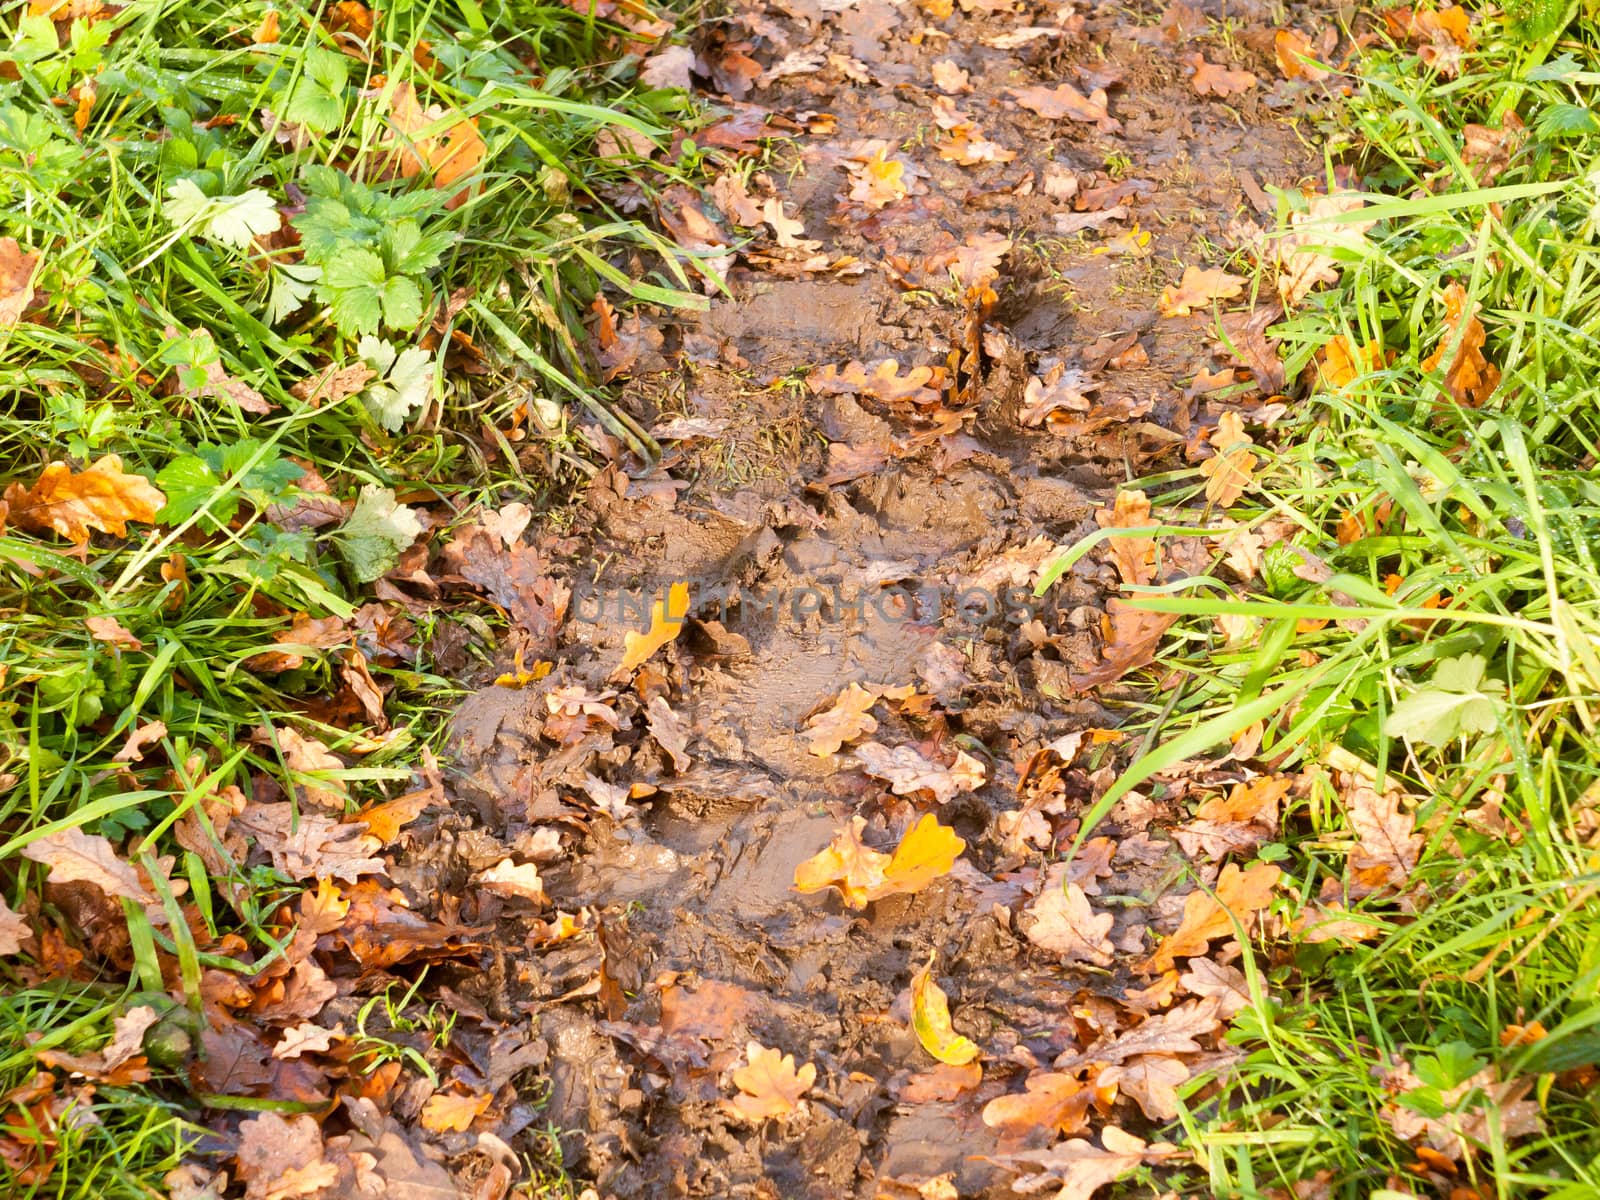 wet and muddy walkway path trek on floor with green grass and fallen autumn leaves; essex; england; uk